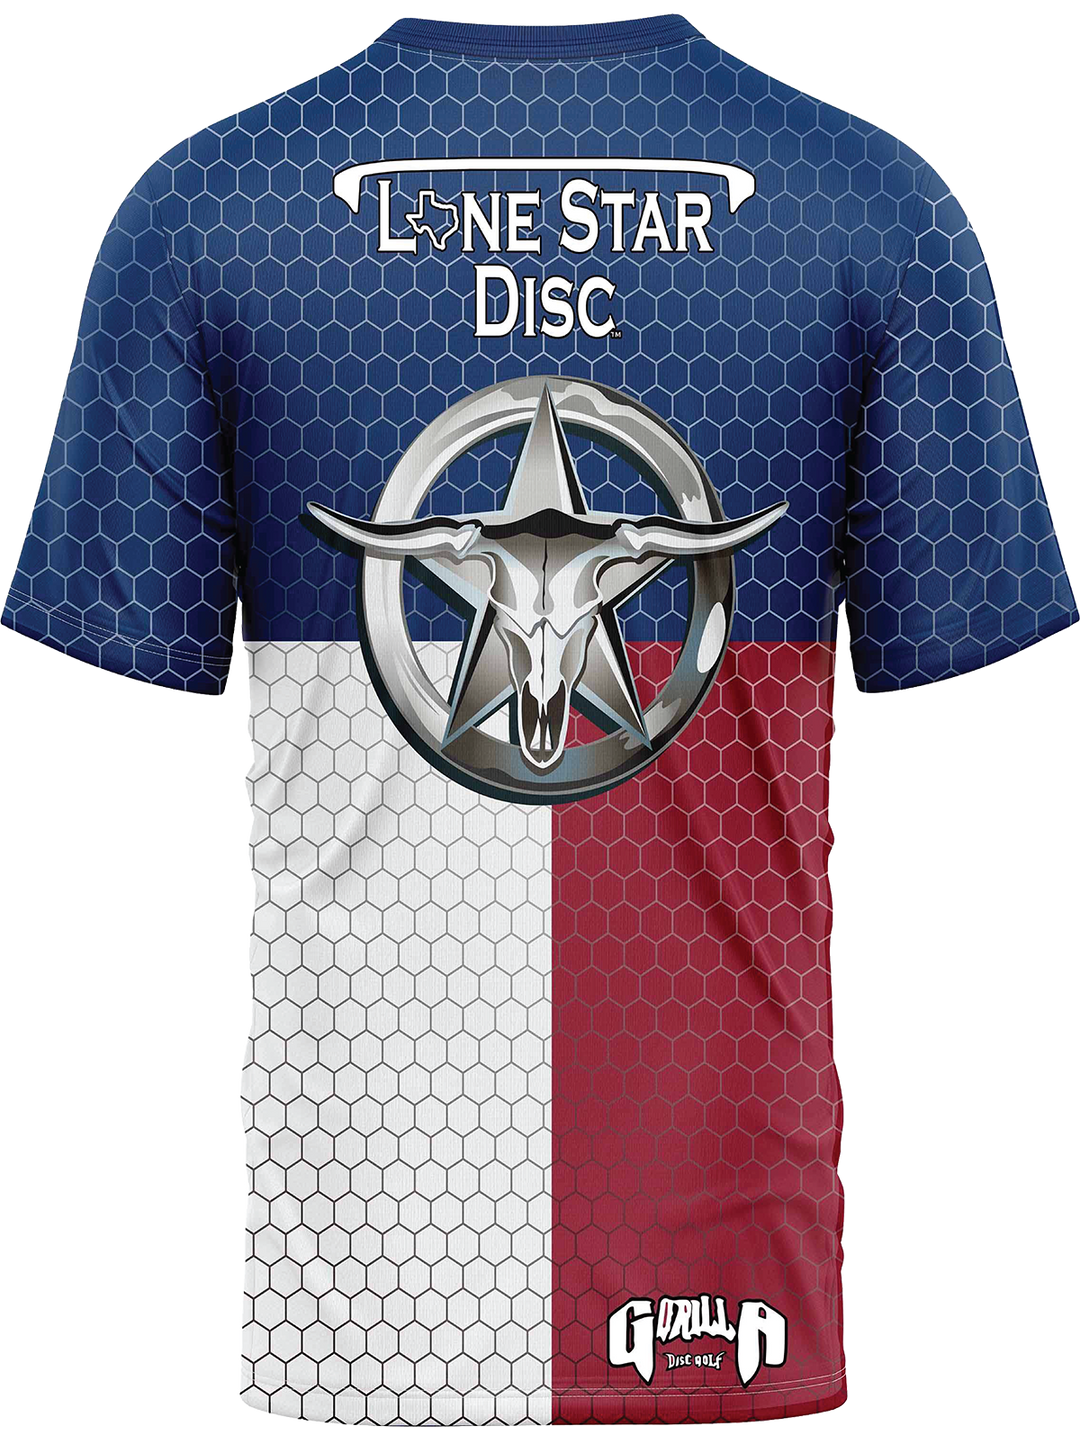 Lone Star Disc Texan Athletic Jersey Youth Sizes